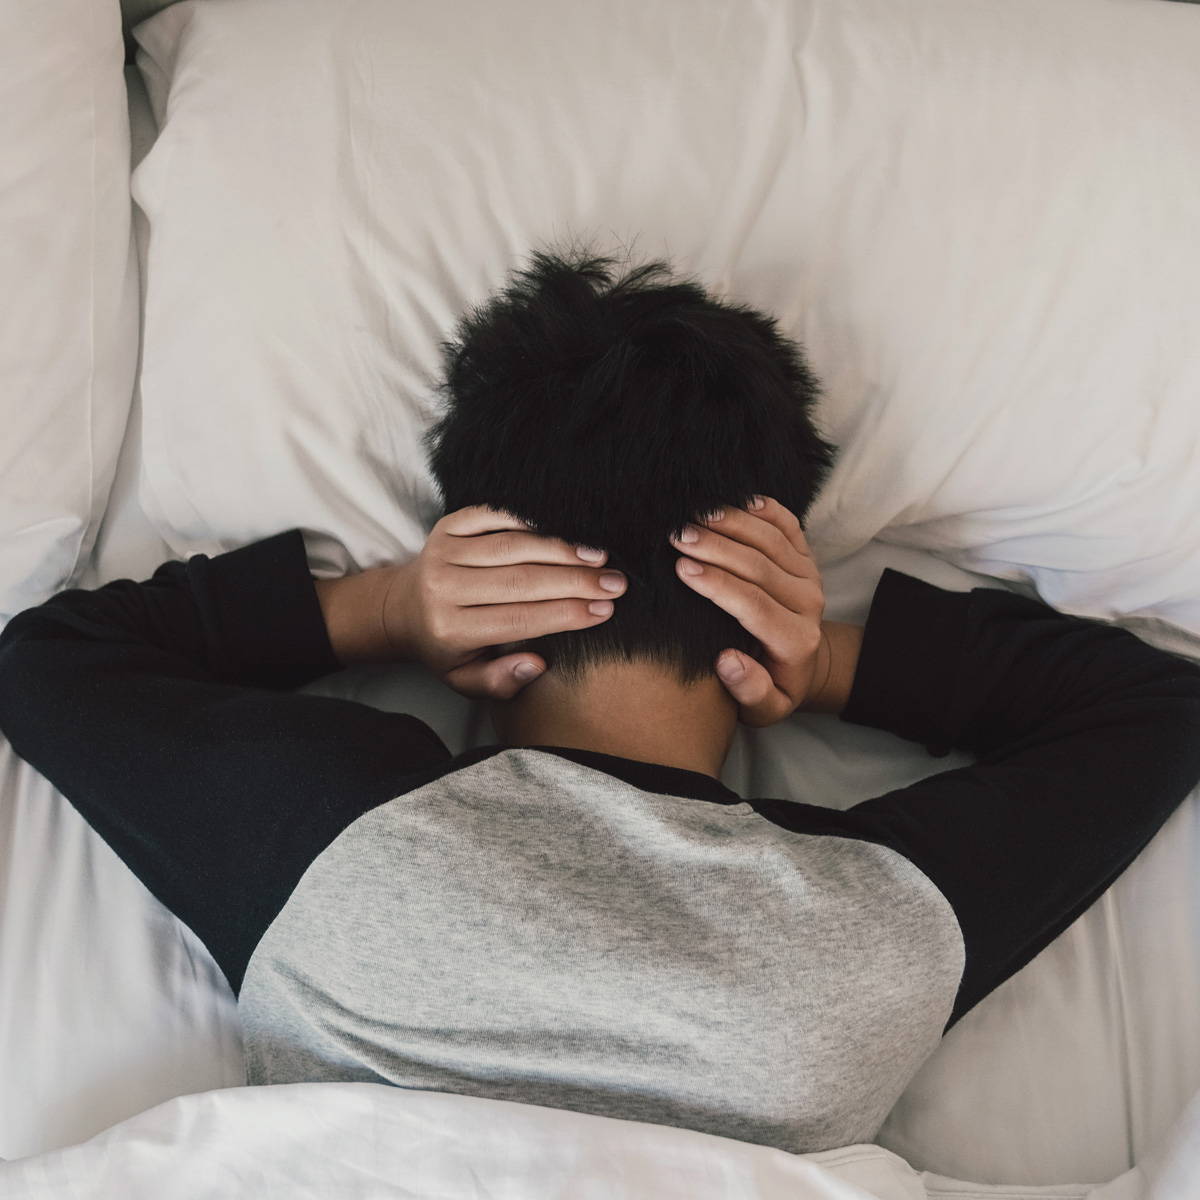 Connection Between Sleep and Mental Health